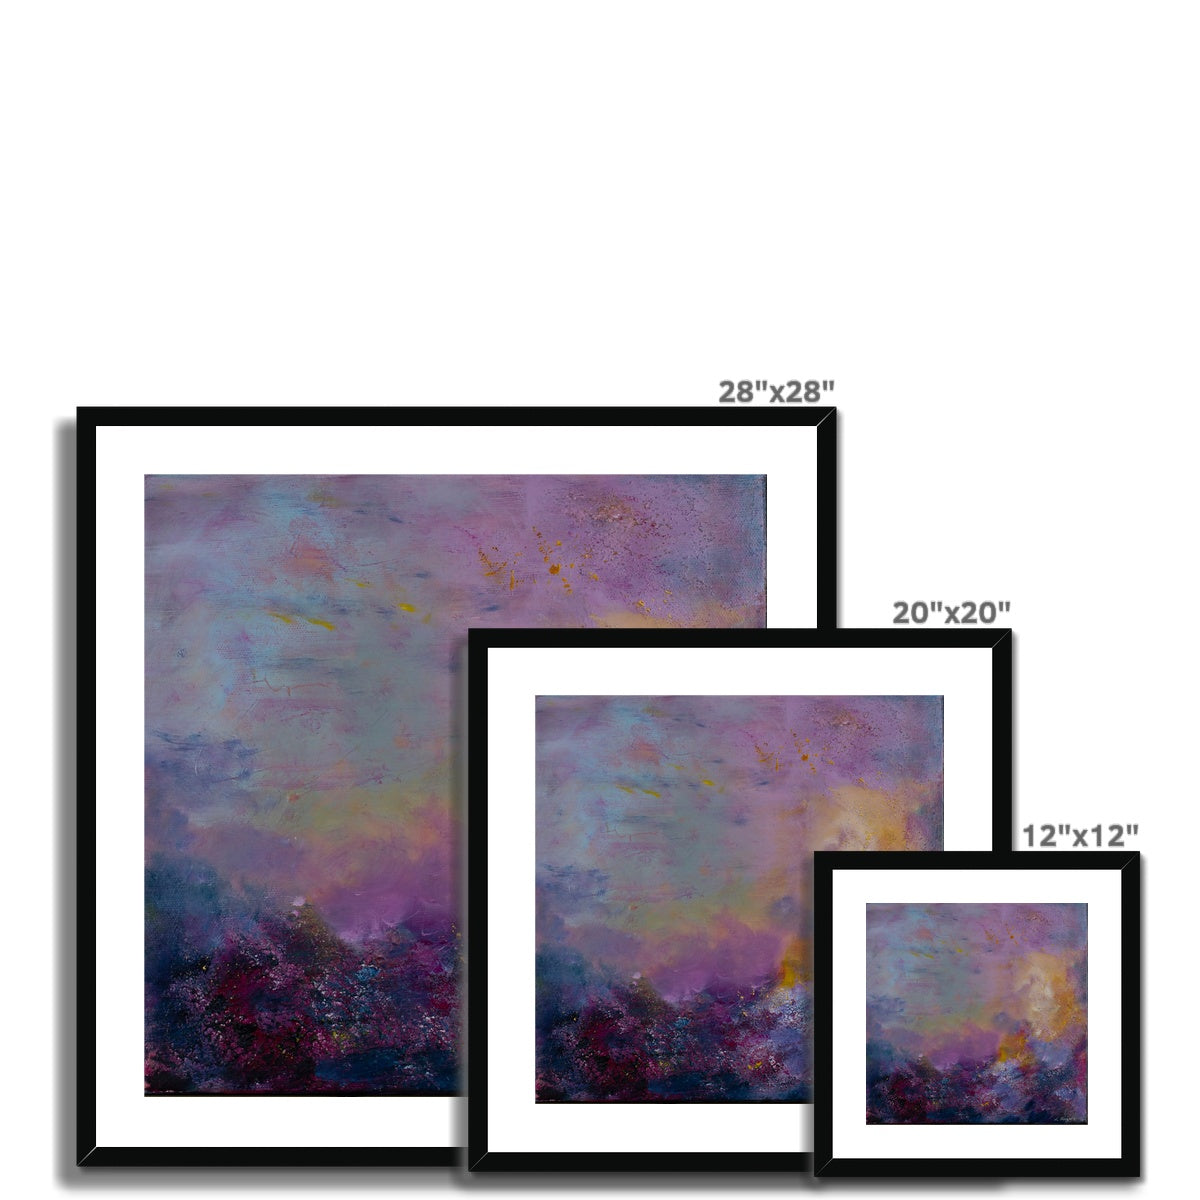 Faraway Thoughts - Abstract Framed and Mounted Print